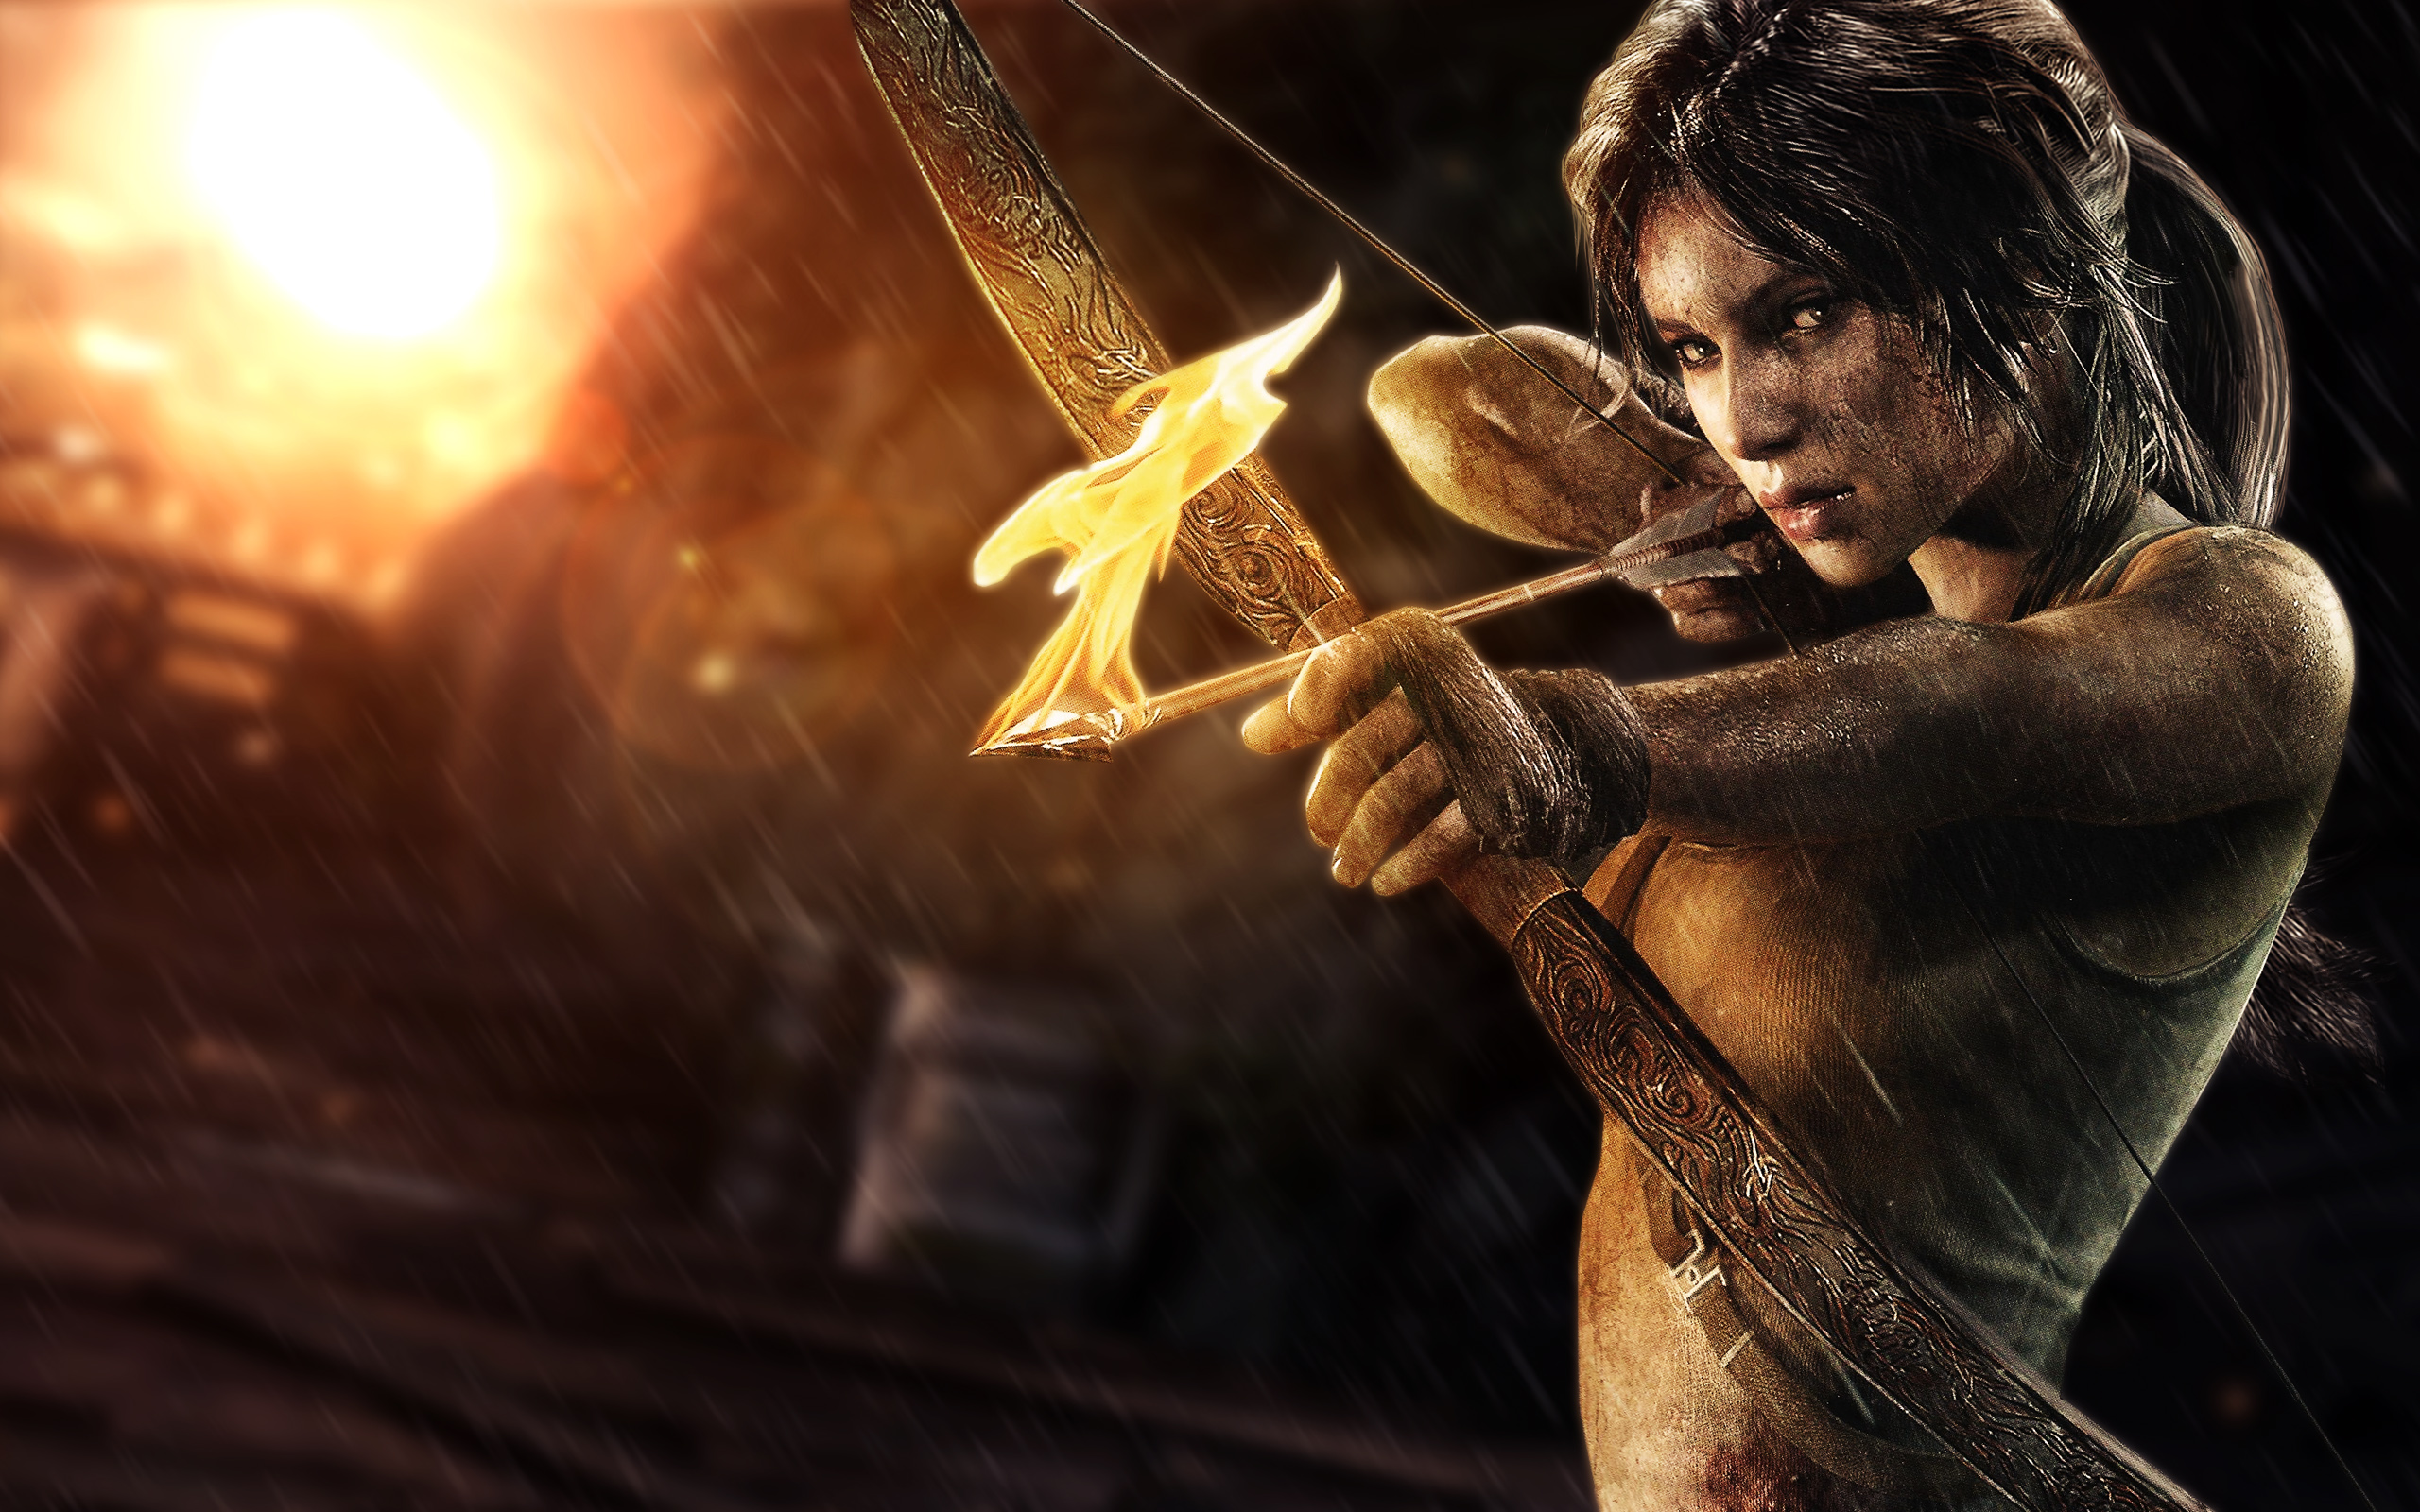 Tomb Raider 2013 New Wallpapers HD Wallpapers 2560x1600